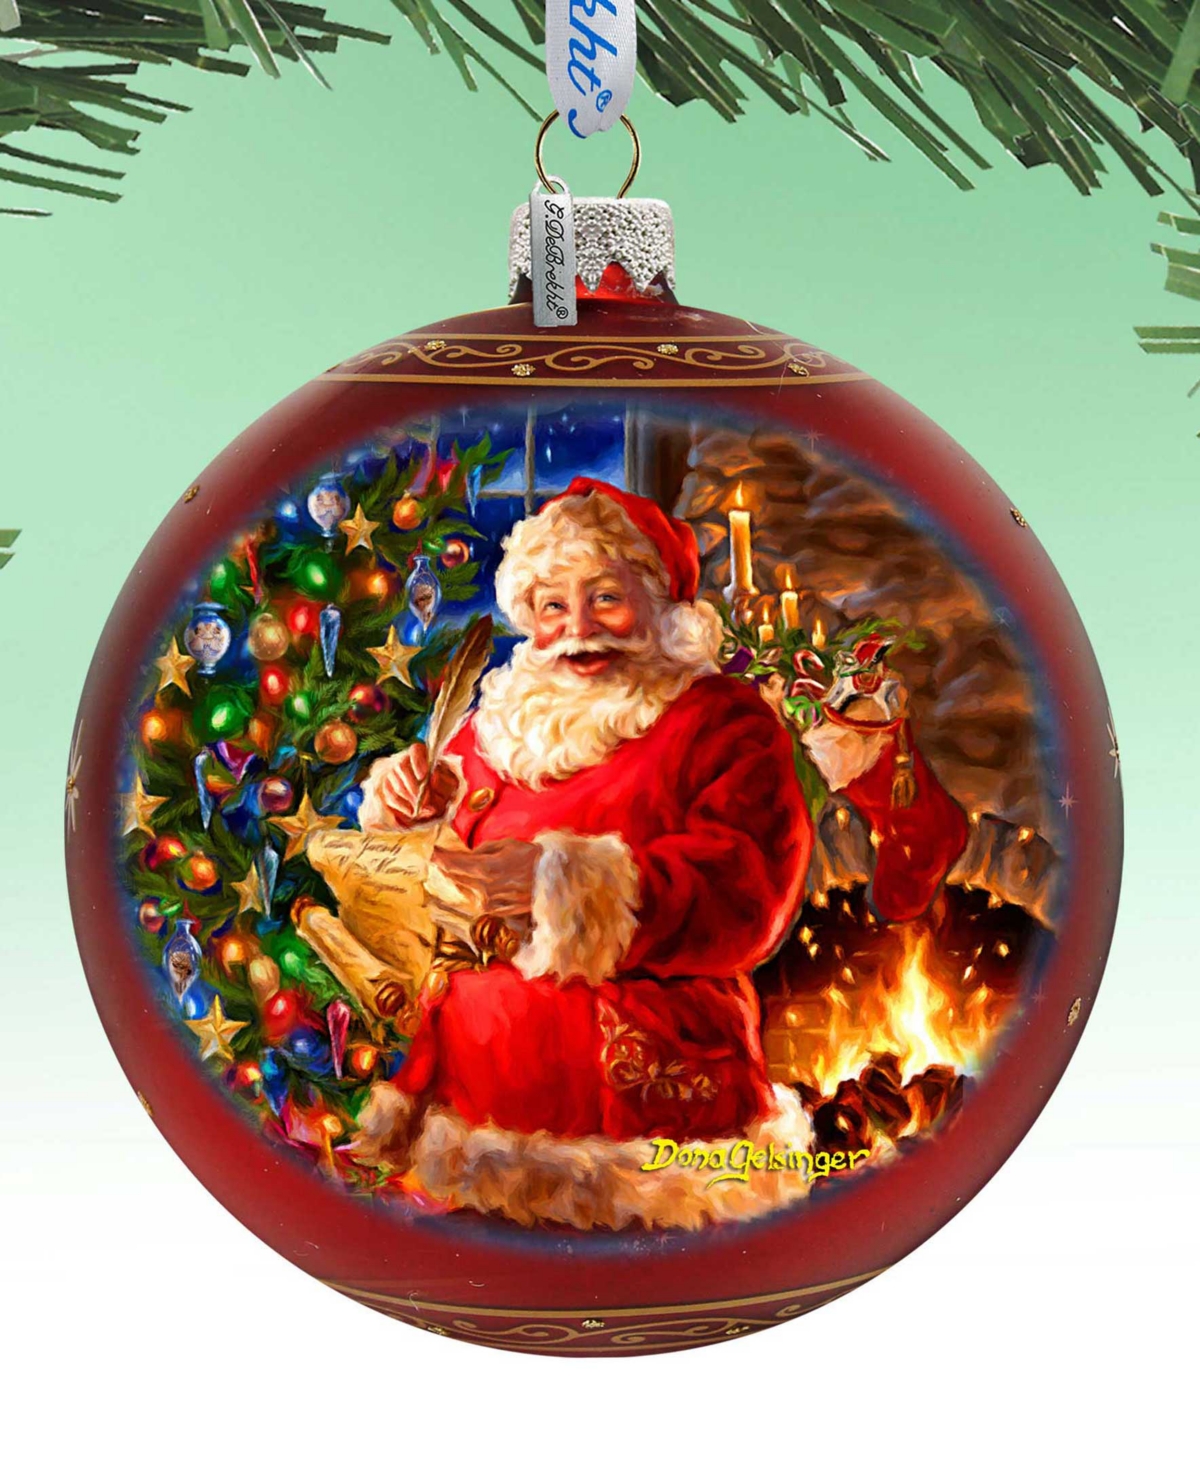 Designocracy Wish List Santa Large Holiday Glass Collectible Ornaments D. Gelsinger In Multi Color